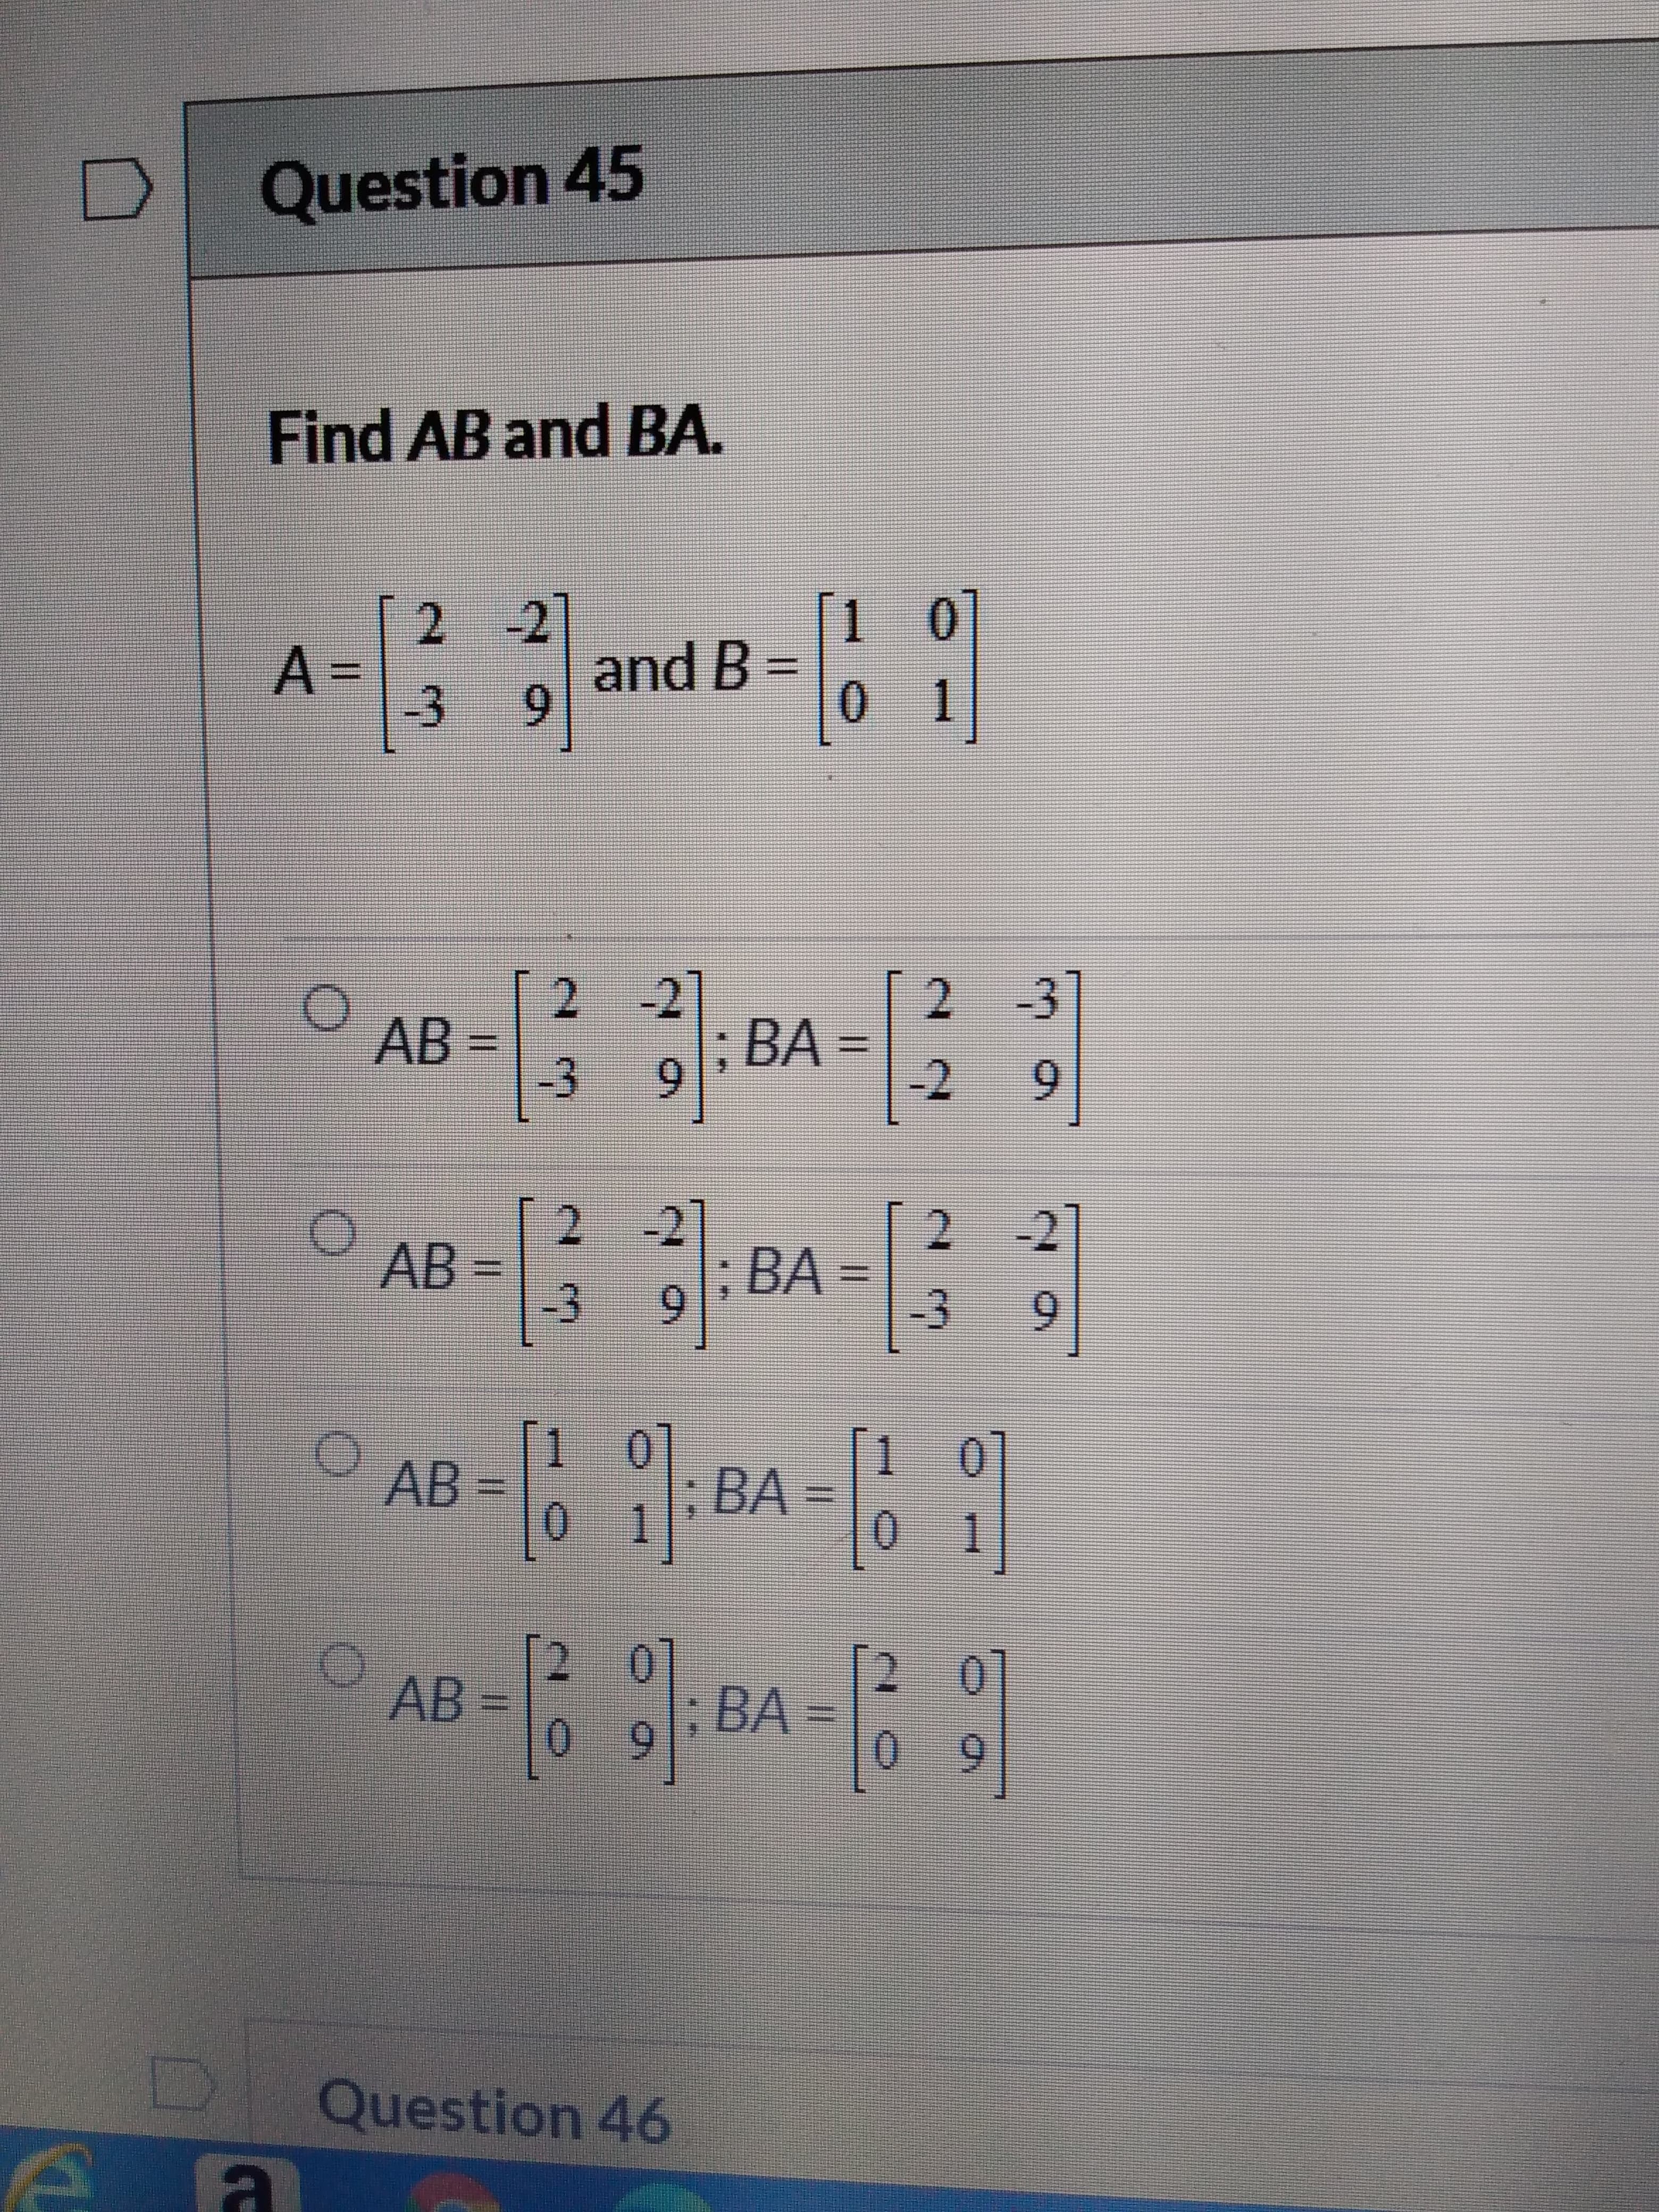 Find AB and BA.
2-2
A3D
-3
1 0
and B =
0.
1.
9.
